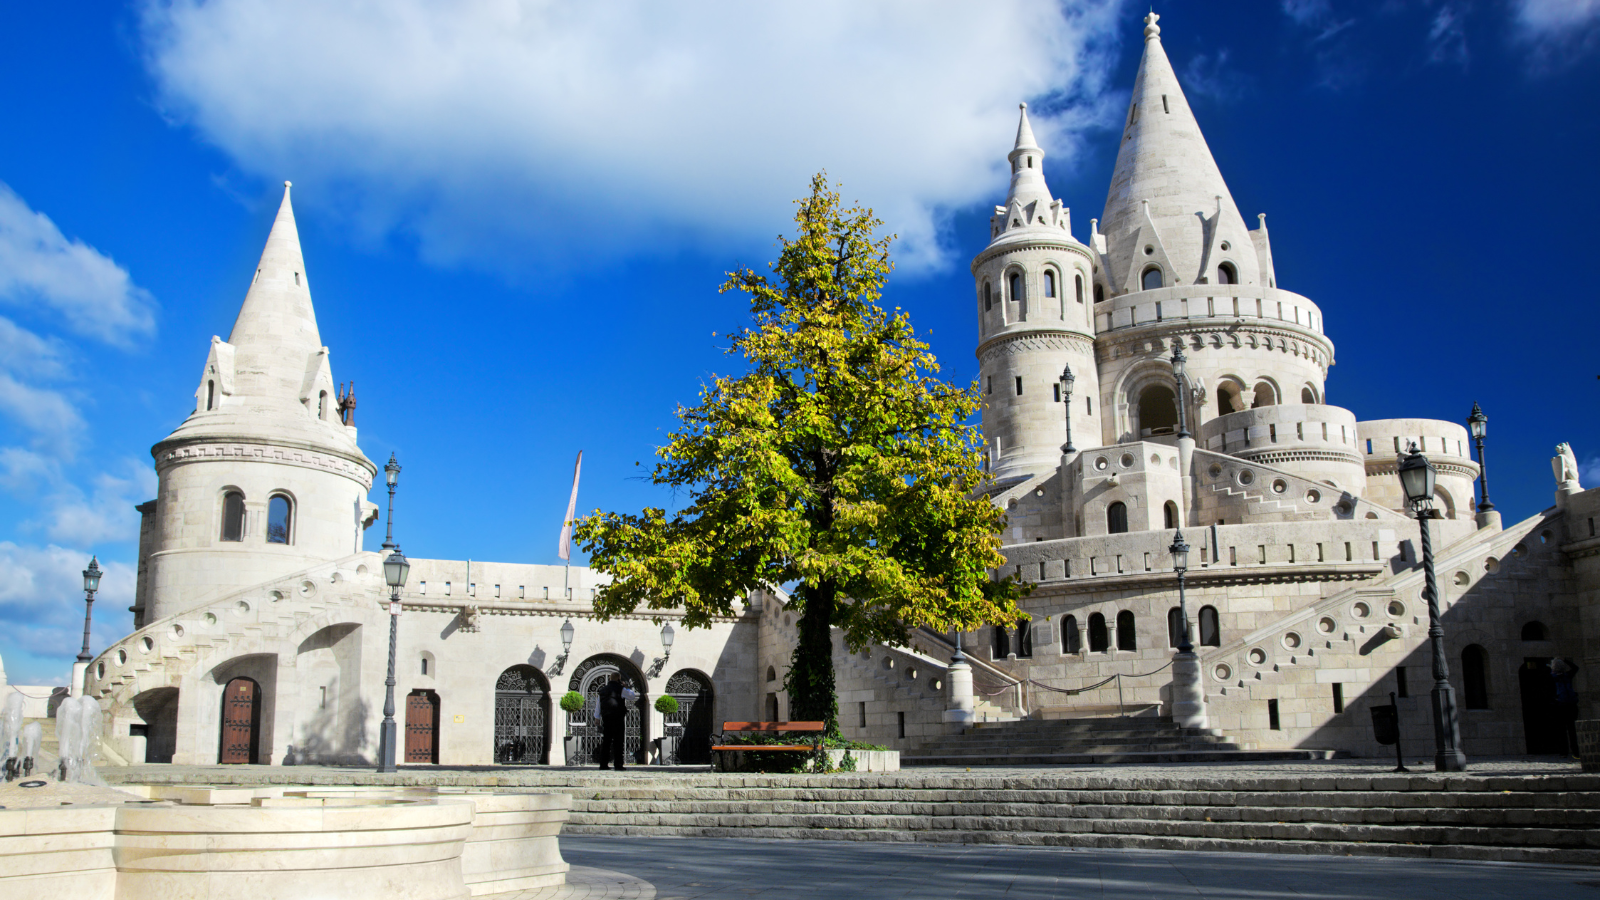 Fisherman's Bastion - bus rental in Budapest for 1 day